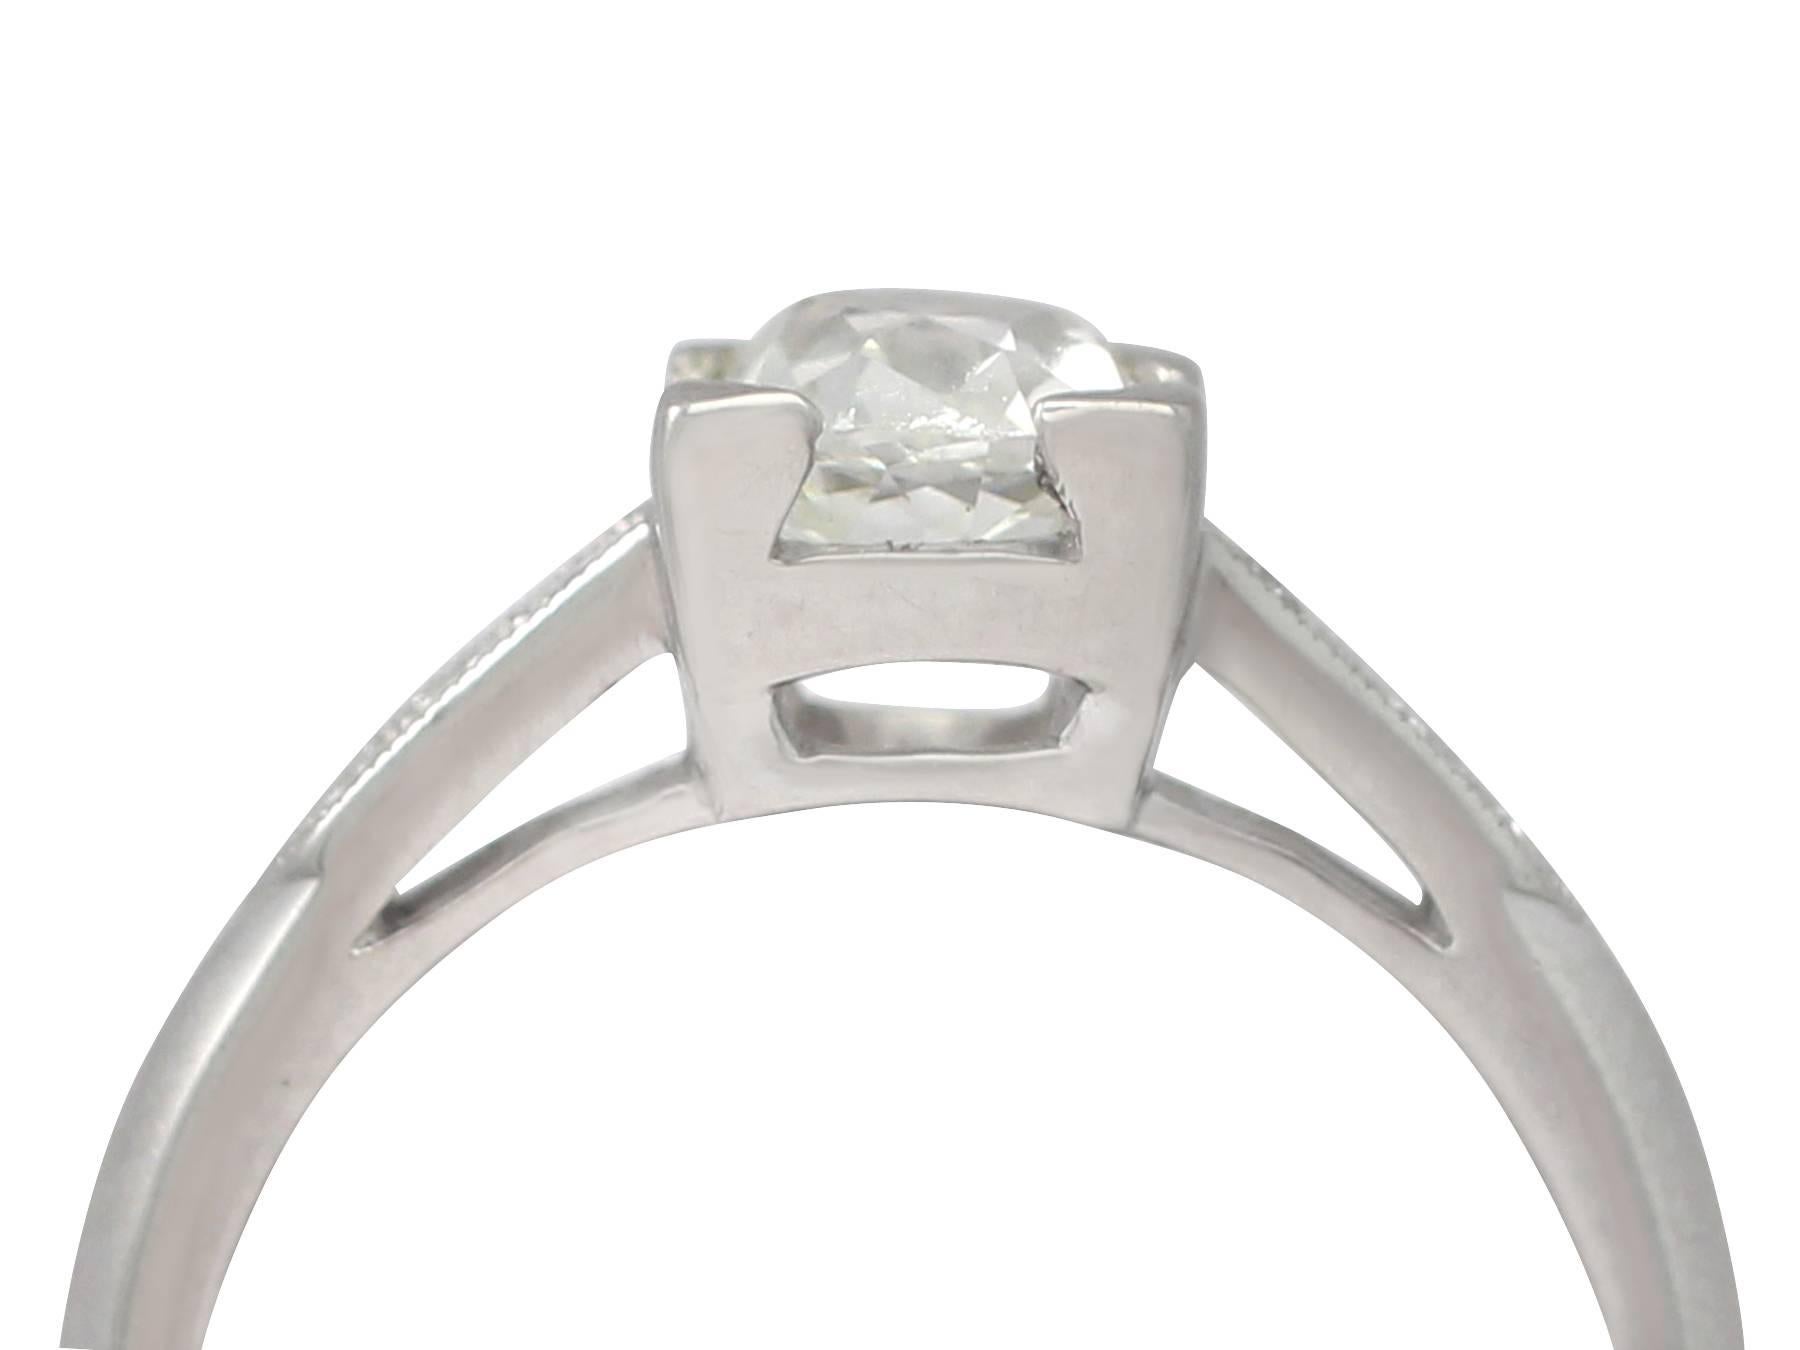 A stunning, fine and impressive antique 1.02 carat diamond solitaire, displayed in a contemporary platinum setting with 0.18 carat (total) diamonds; part of our diverse diamond jewelry and estate jewelry collections

This stunning, fine and